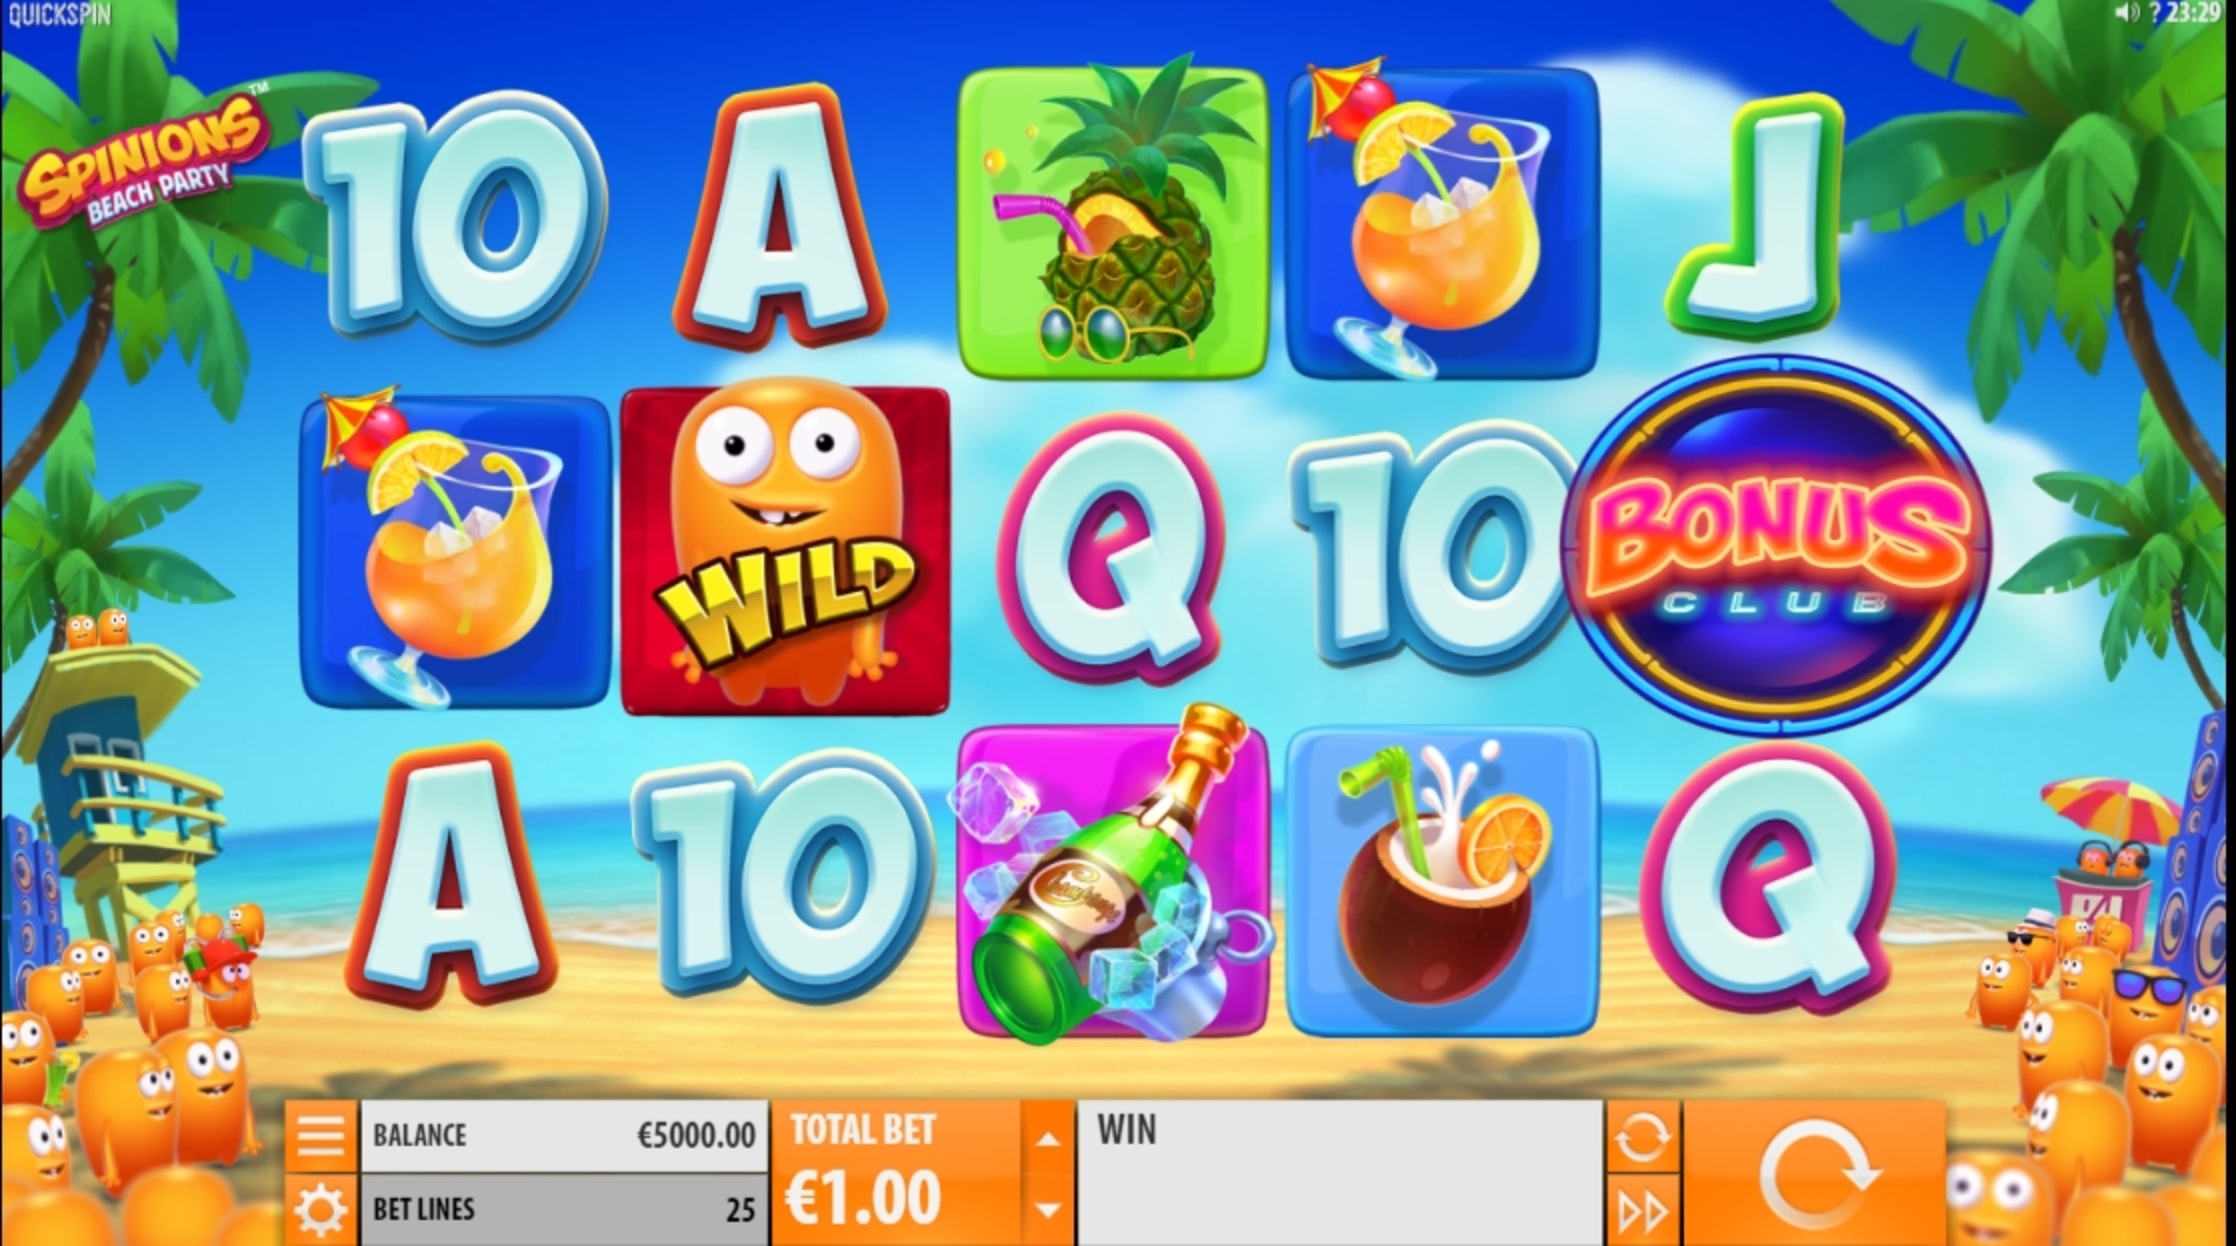 Reels in Spinions Slot Game by Quickspin